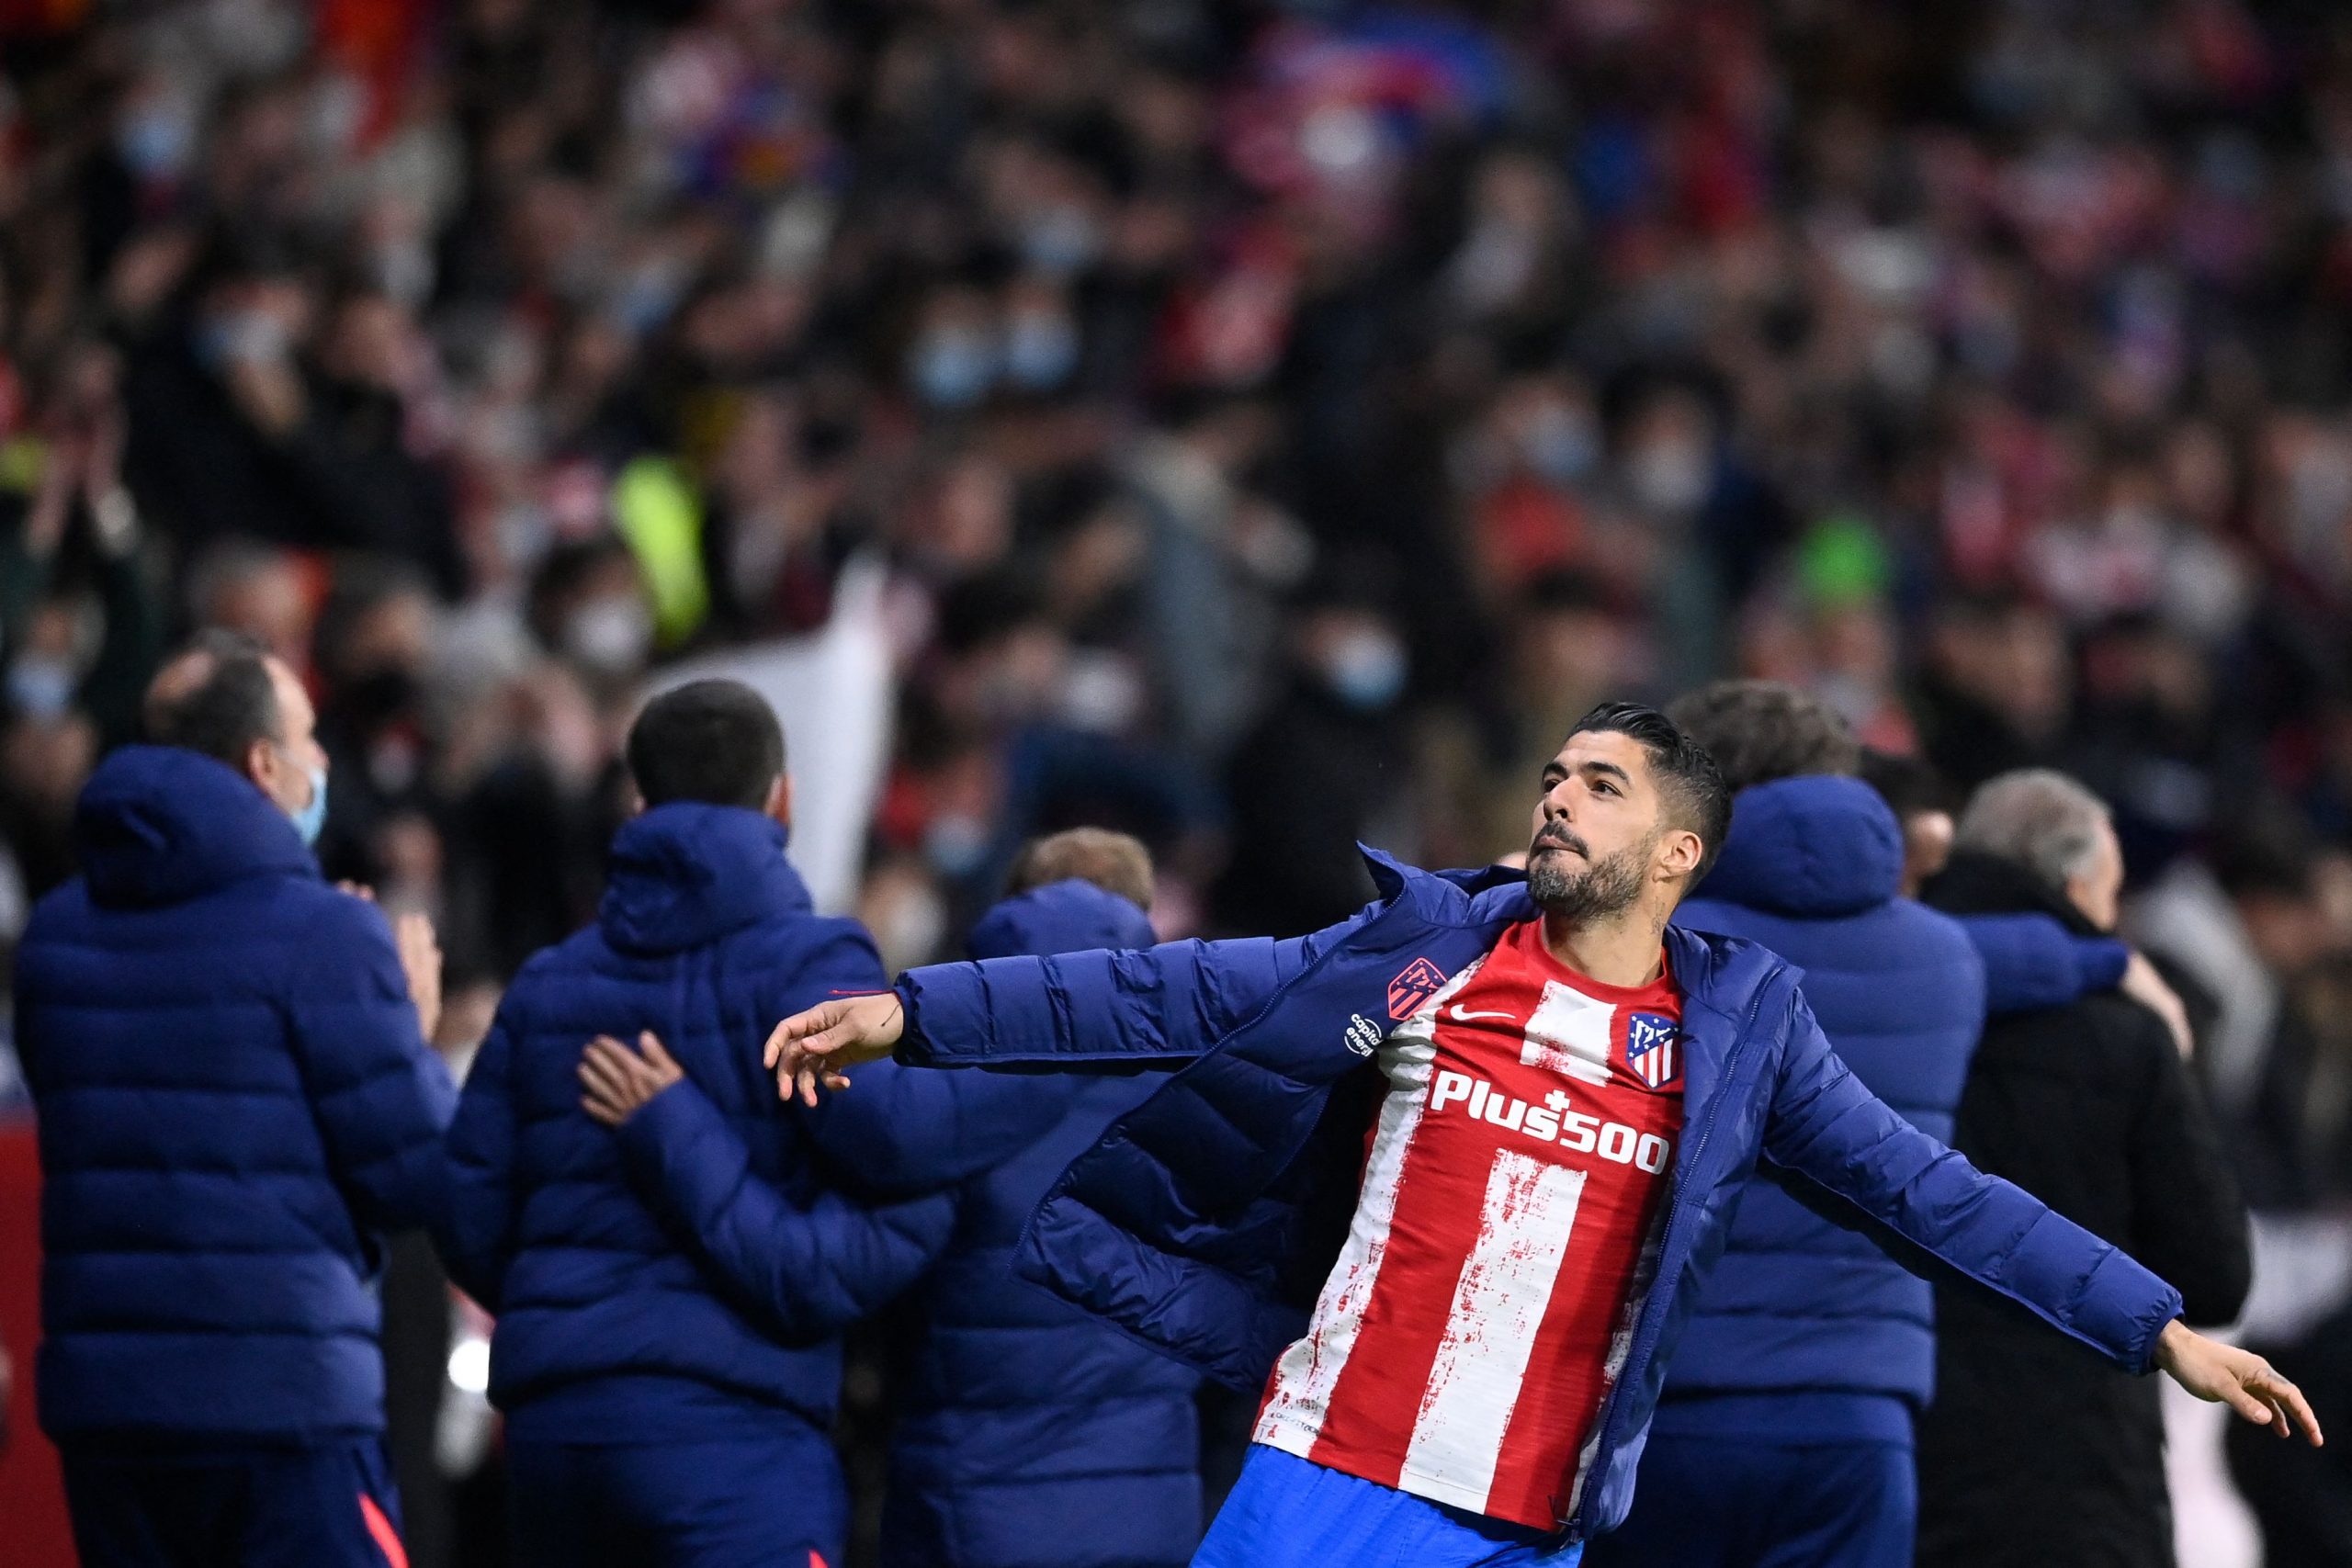 Atletico Madrid ace Luis Suarez expected to miss Champions League clash against Manchester United .